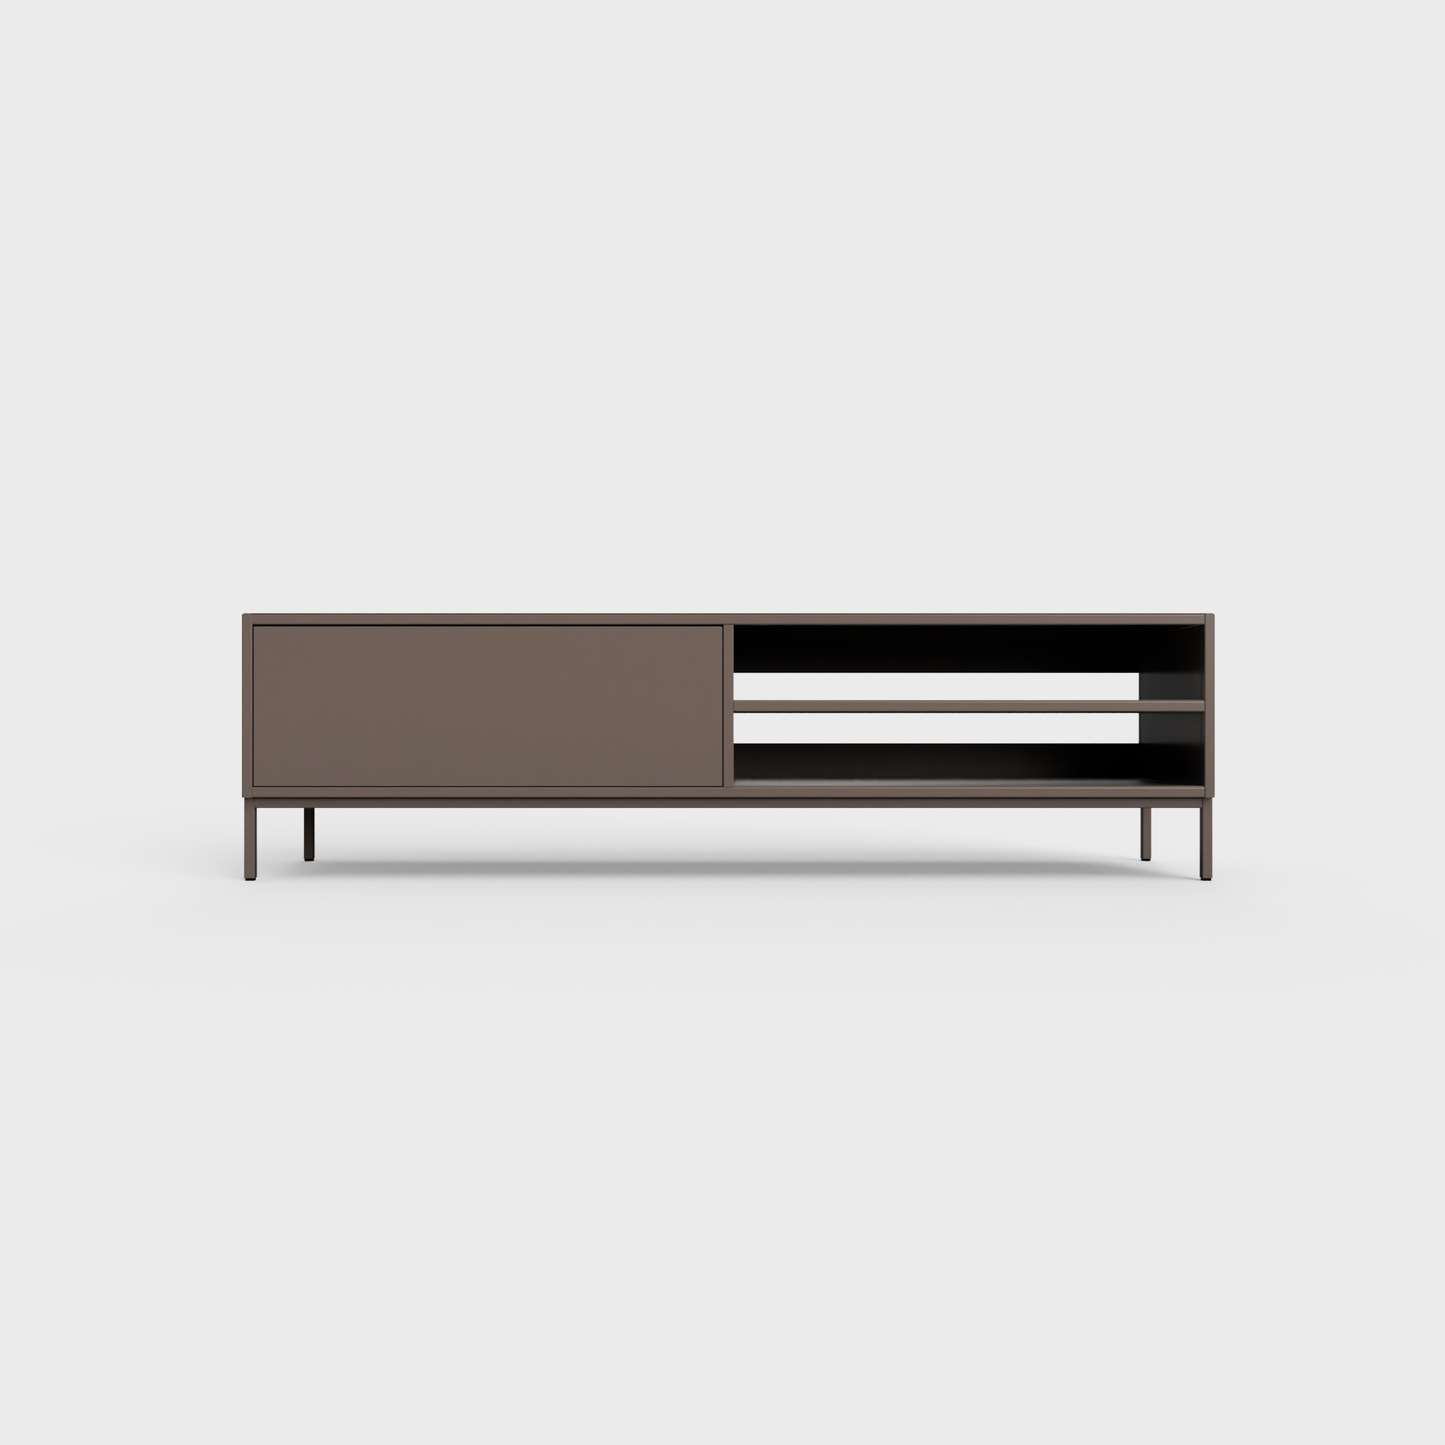 Prunus 02 Lowboard in Earth color, powder-coated steel, elegant and modern piece of furniture for your living room